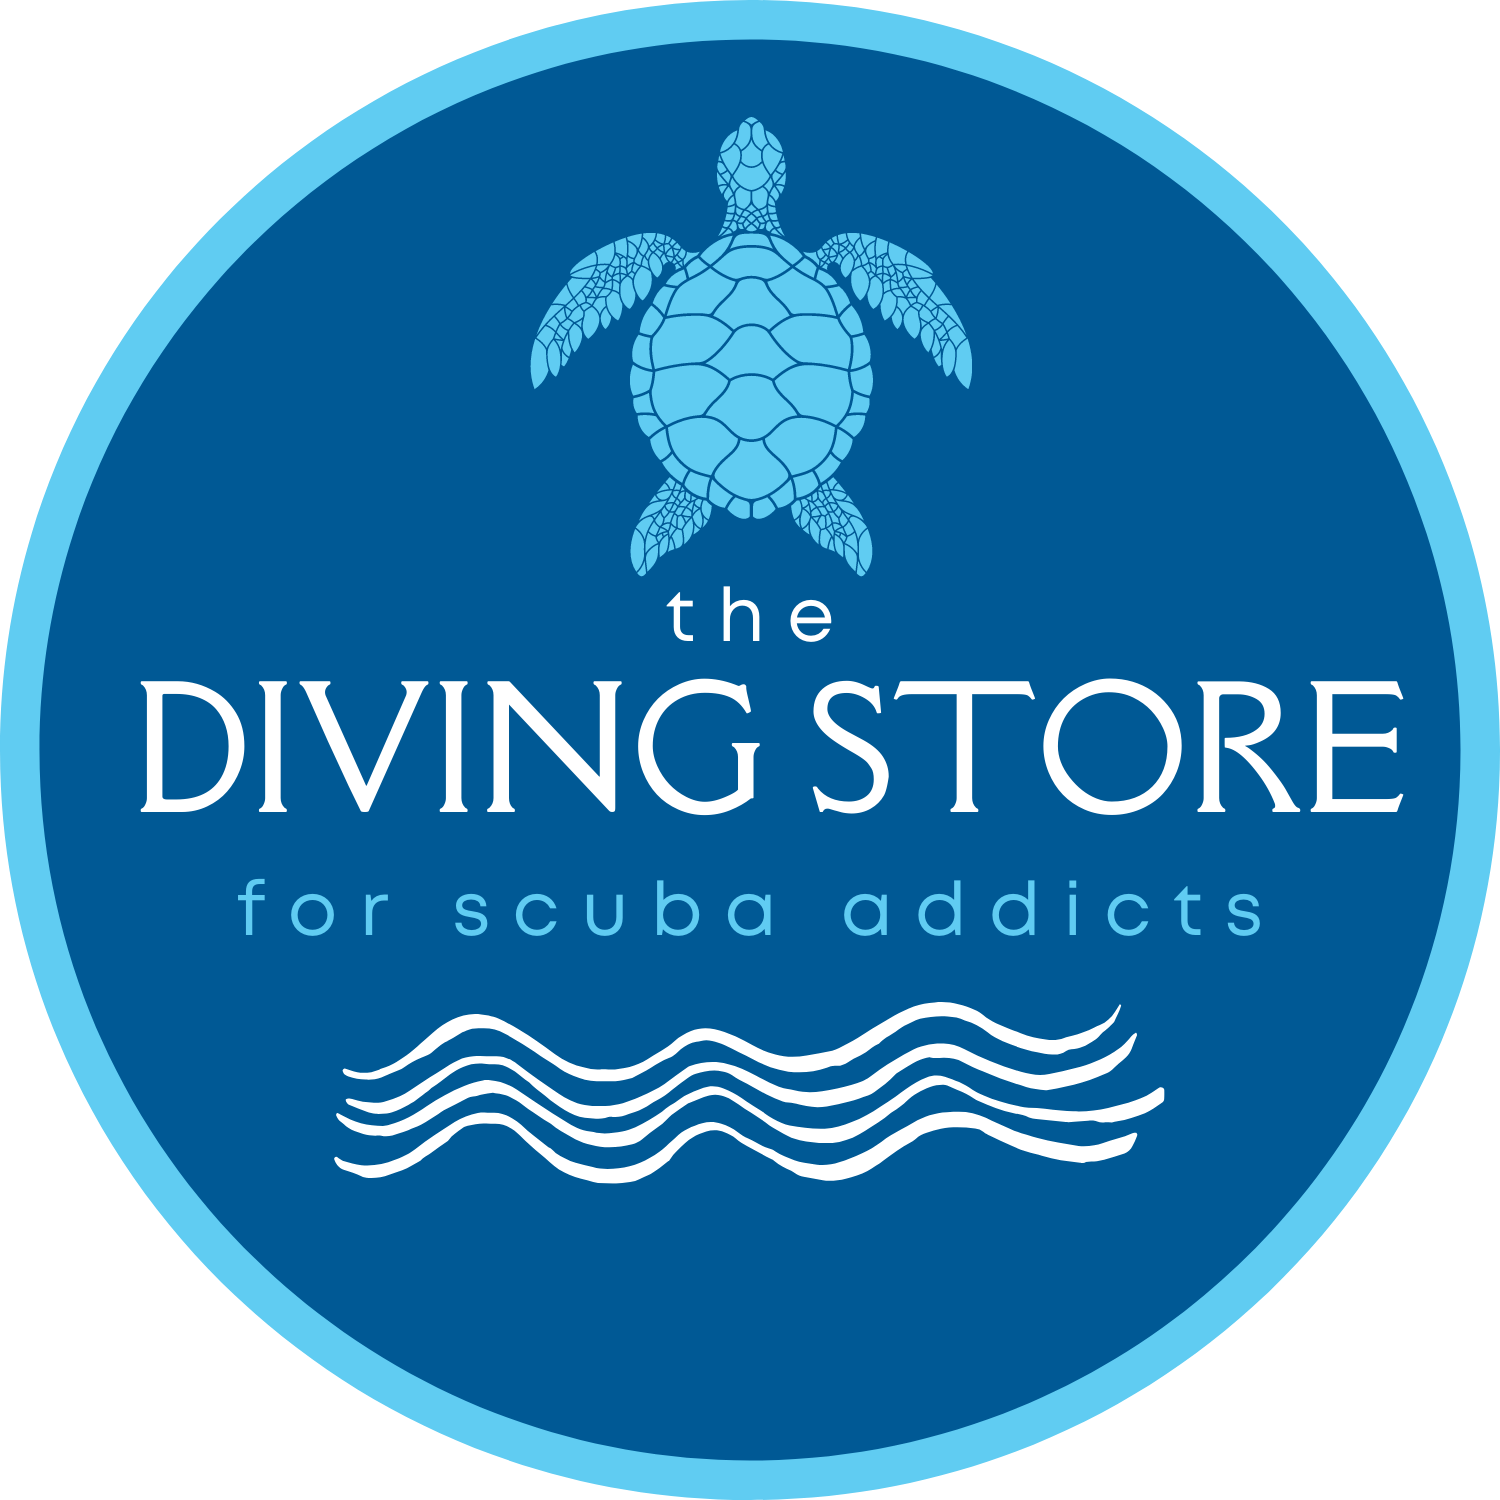 The Diving Store